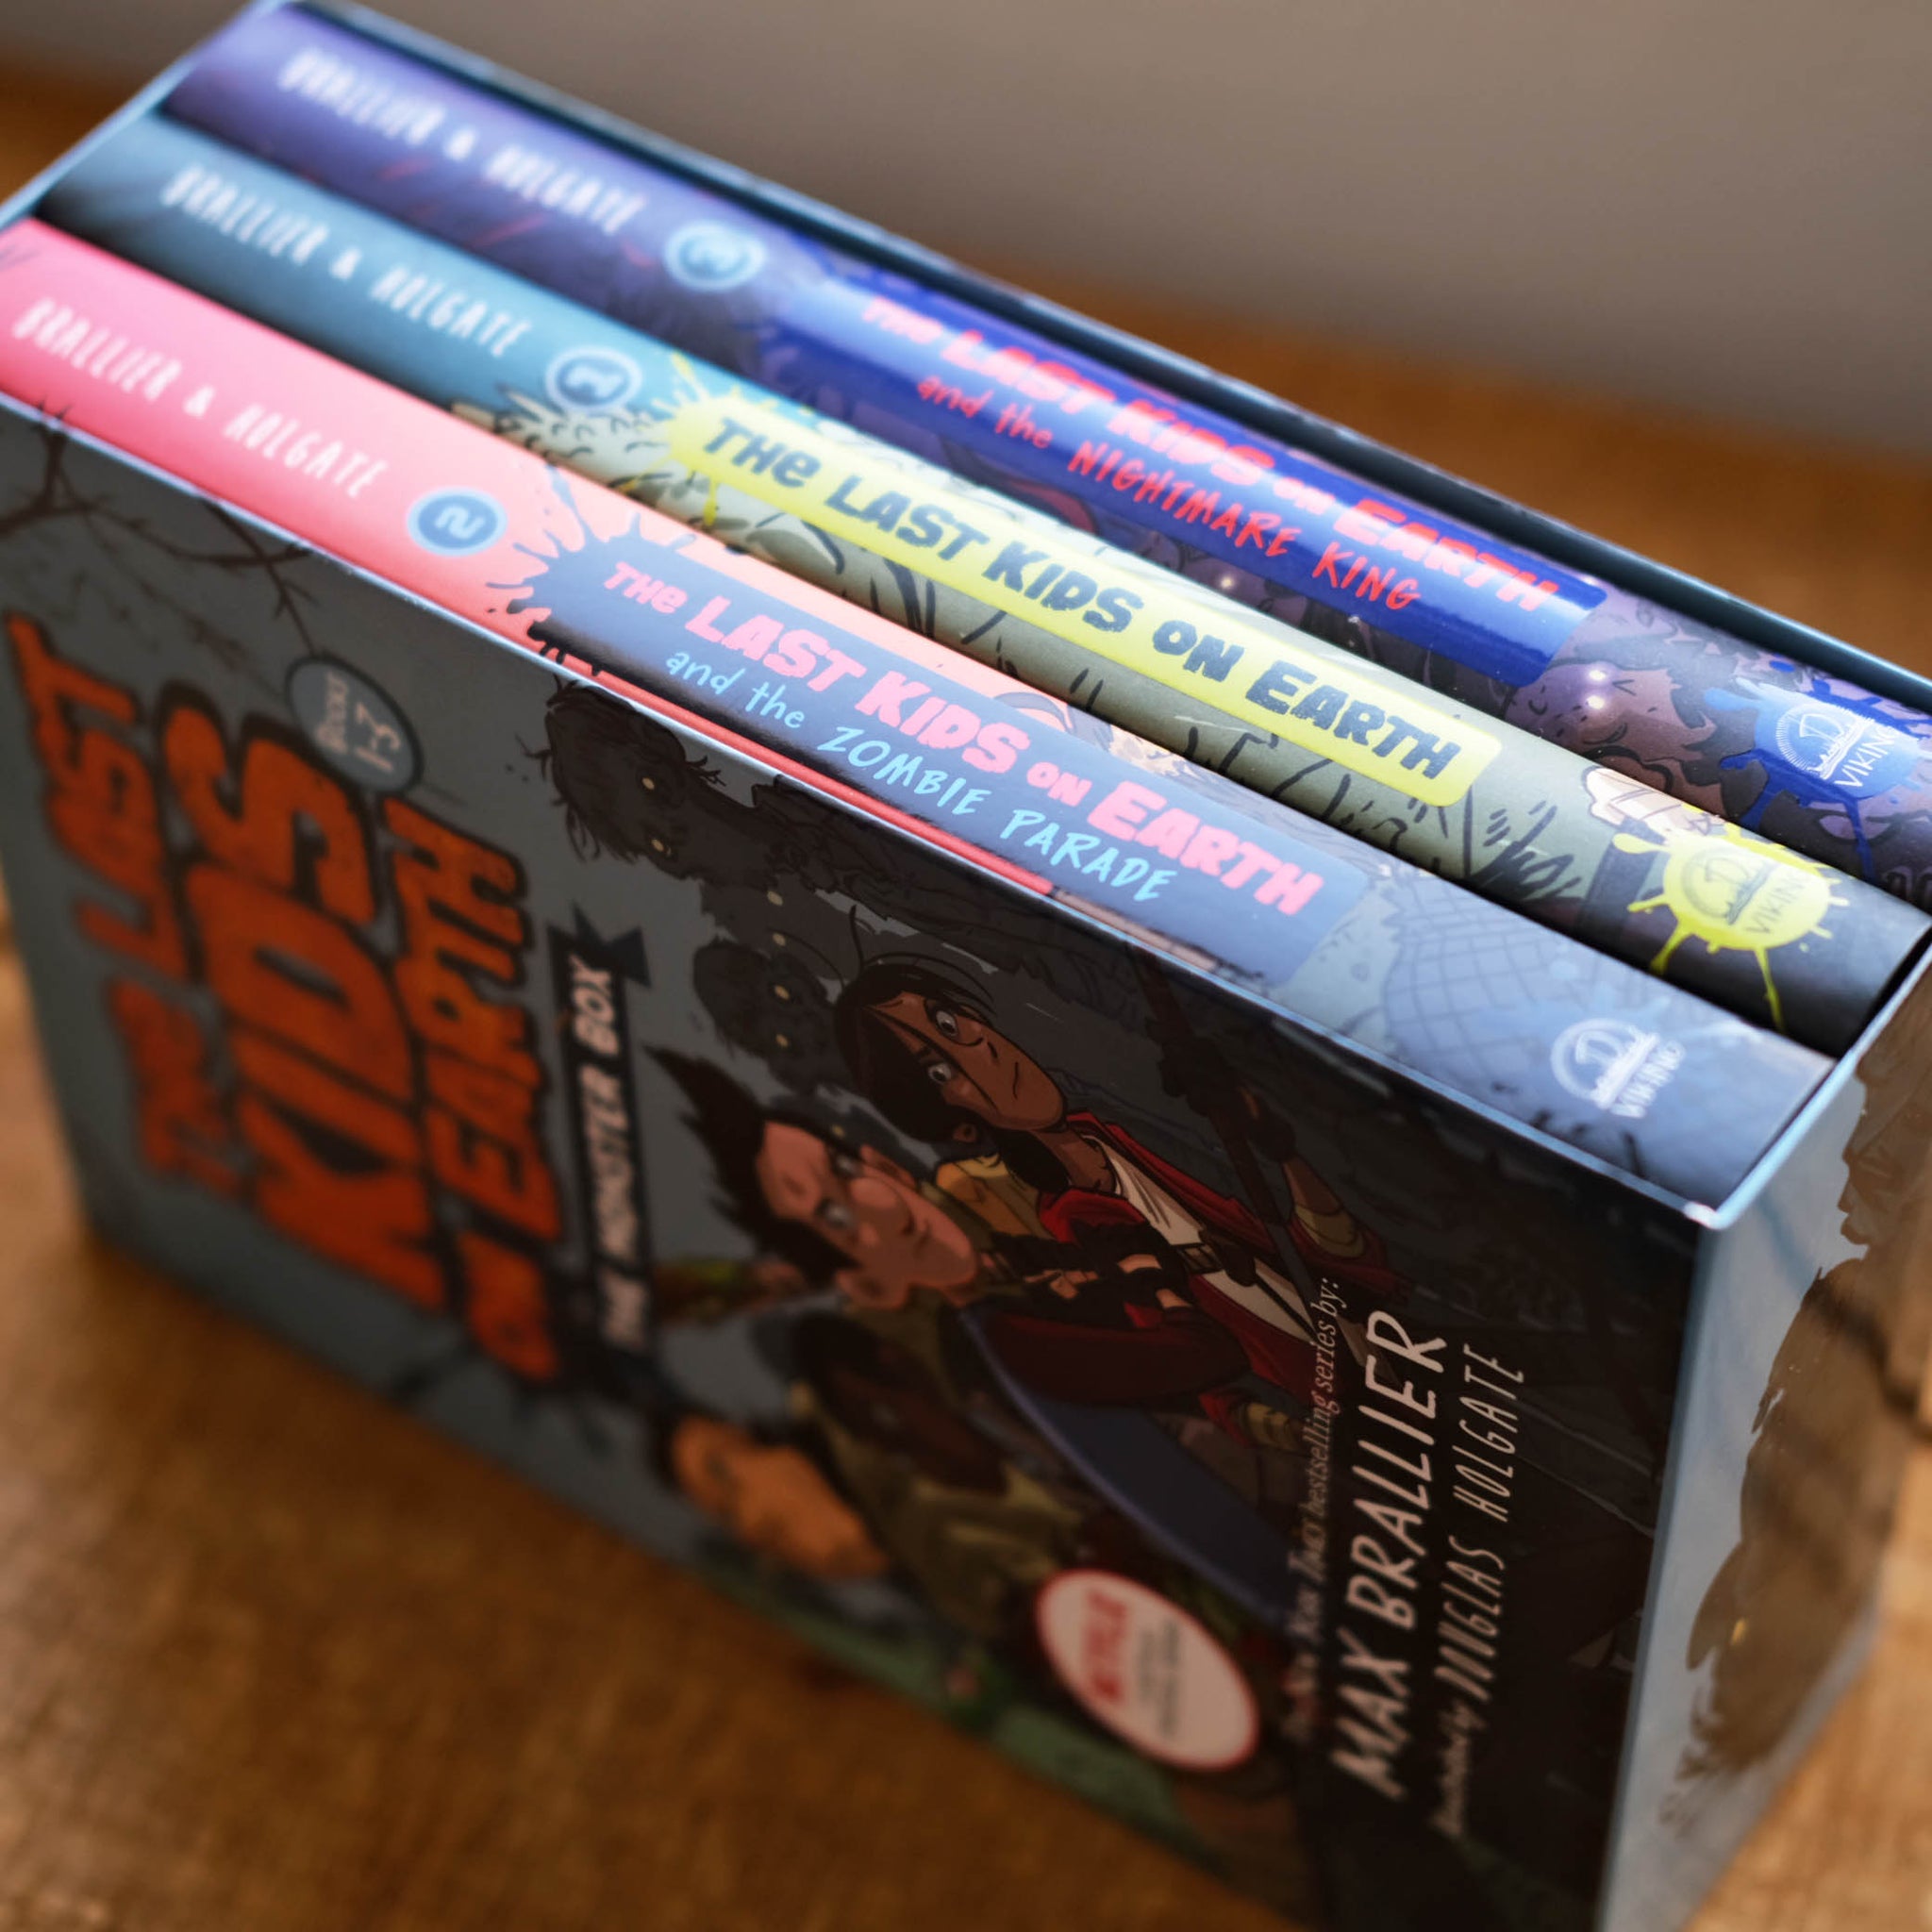 The Last Kids on Earth: The Monster Box (Books 1-3)